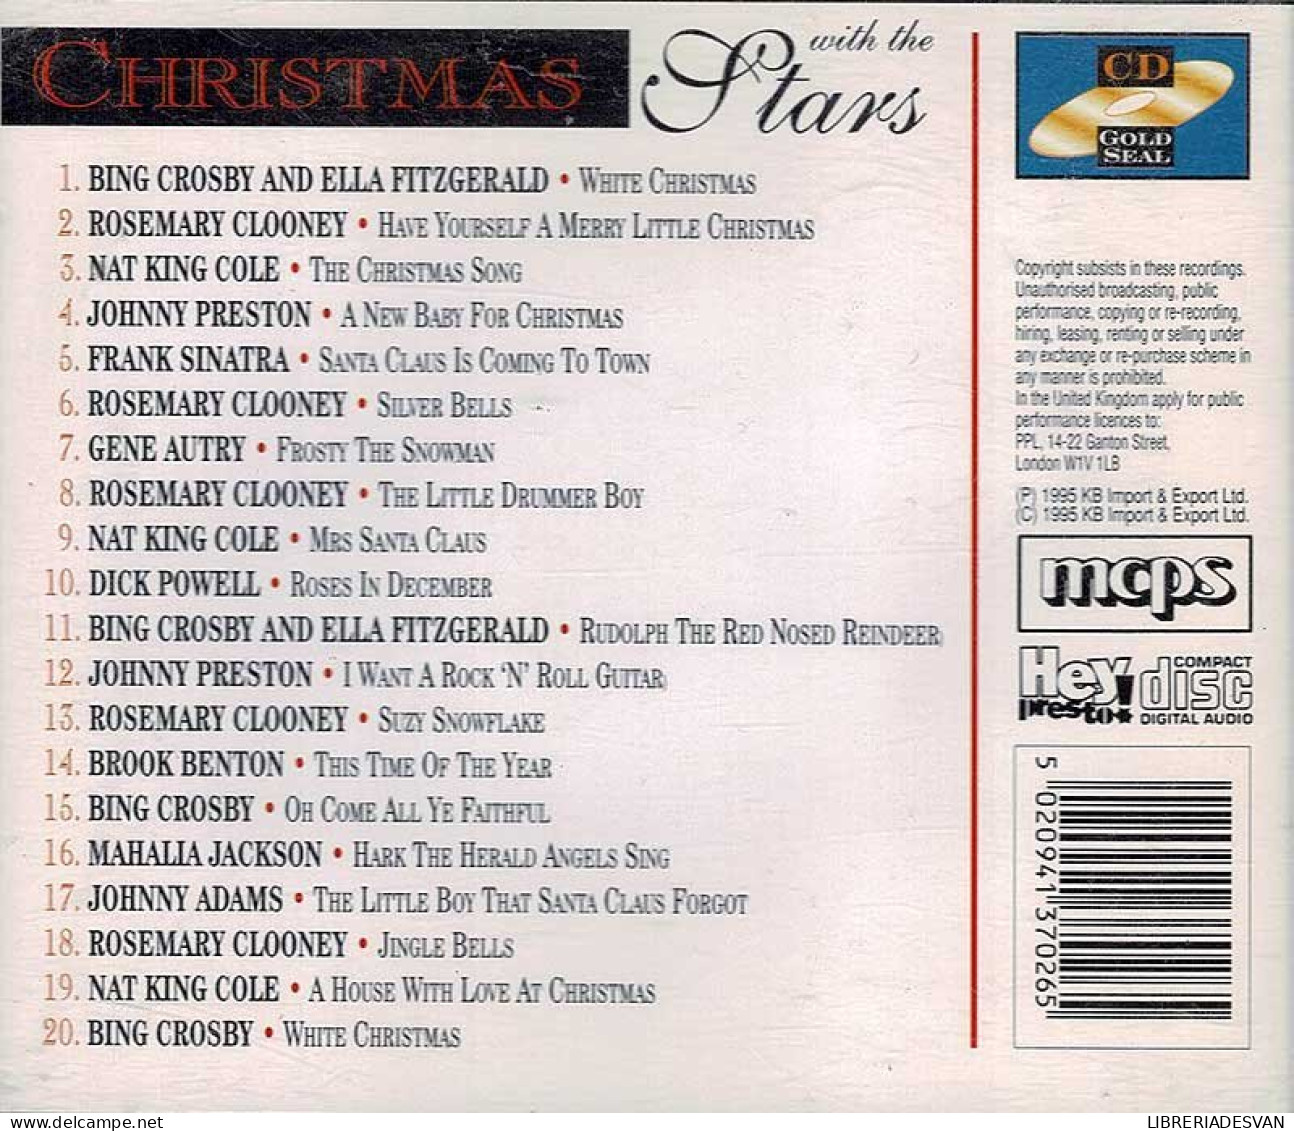 Christmas With The Stars. CD - Country Et Folk